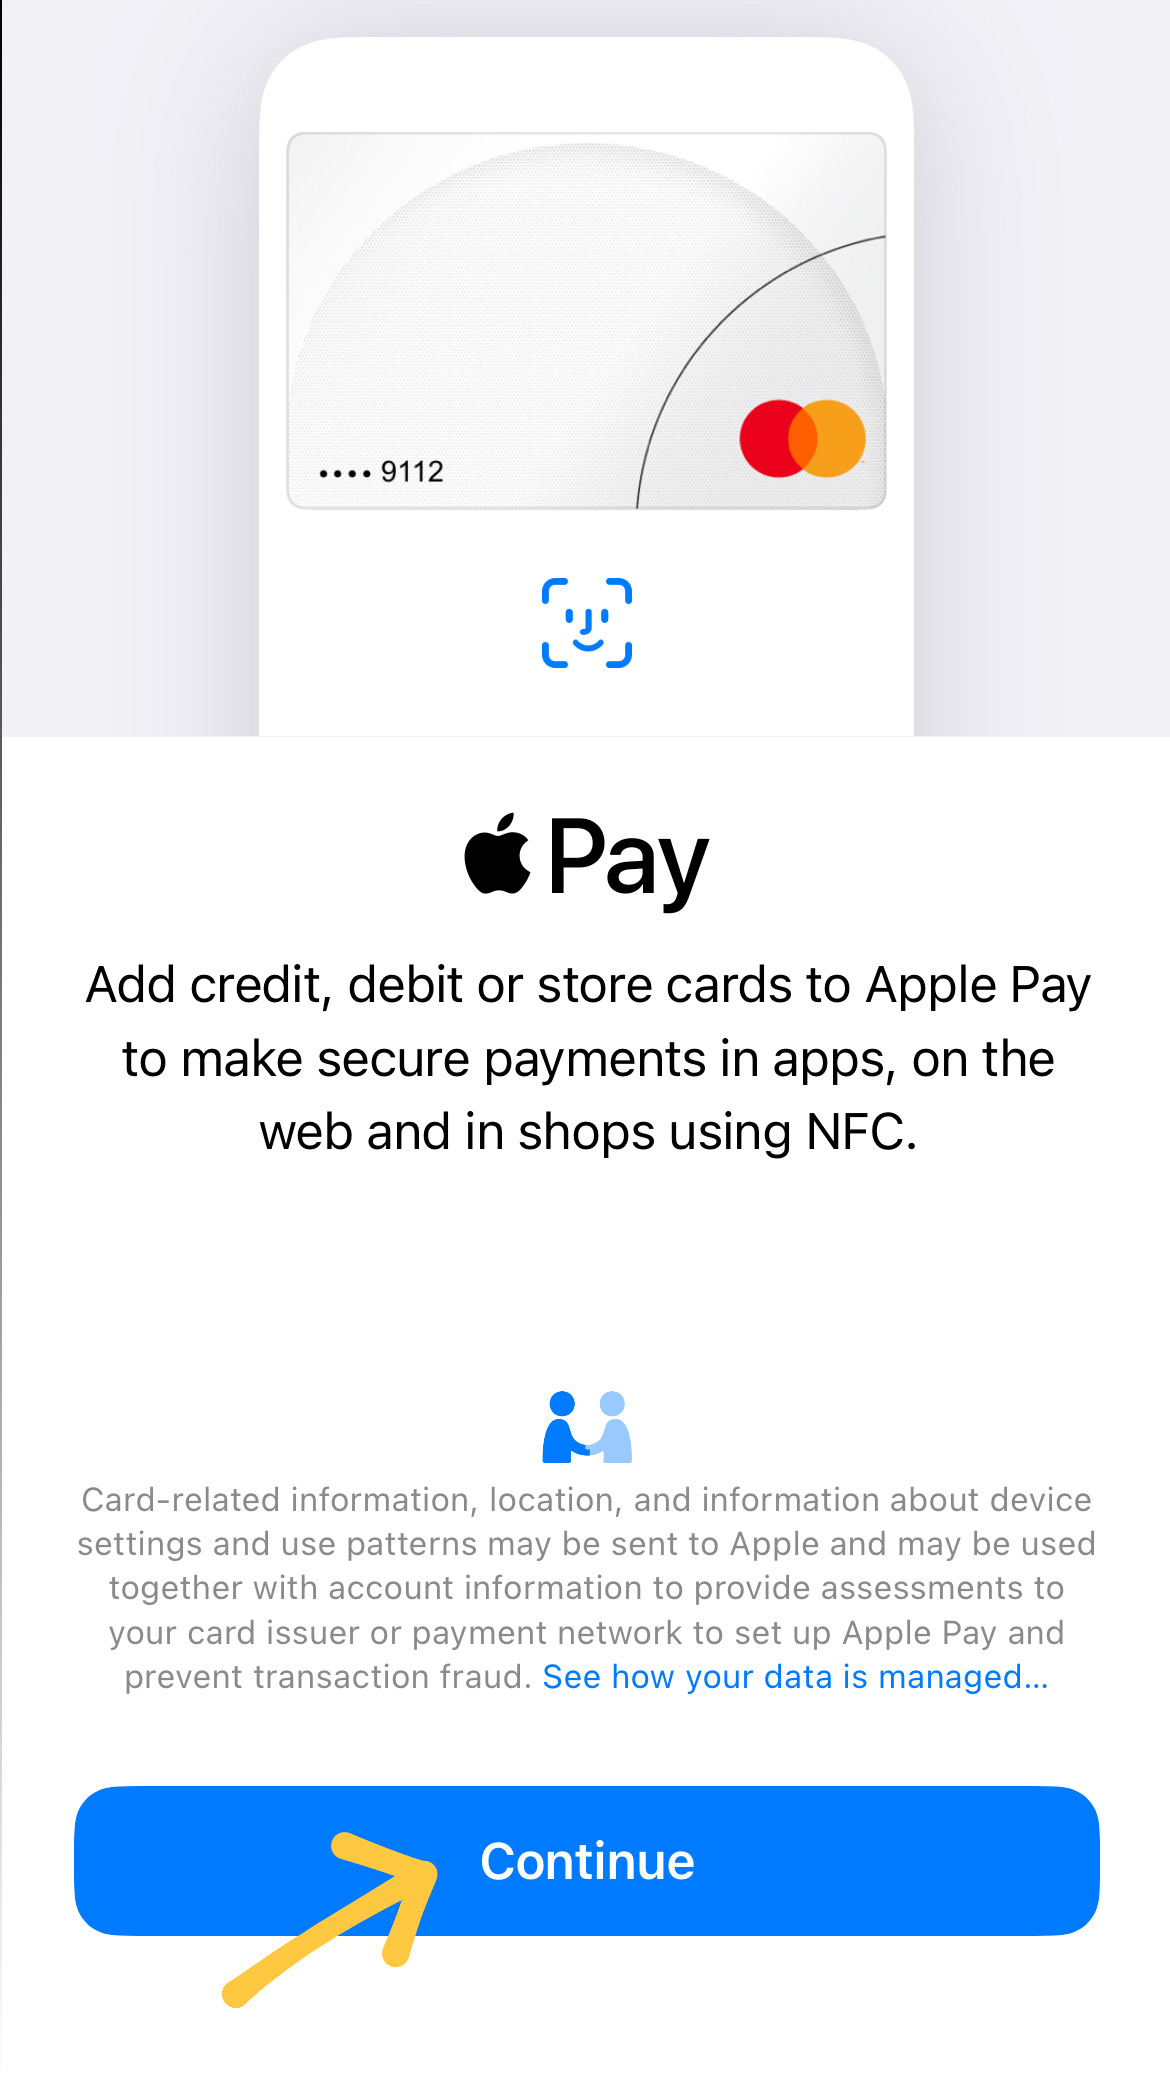 Apple Pay Malaysia is finally available! Here's how you can set it up in a few easy steps. Image credit: Wau Post